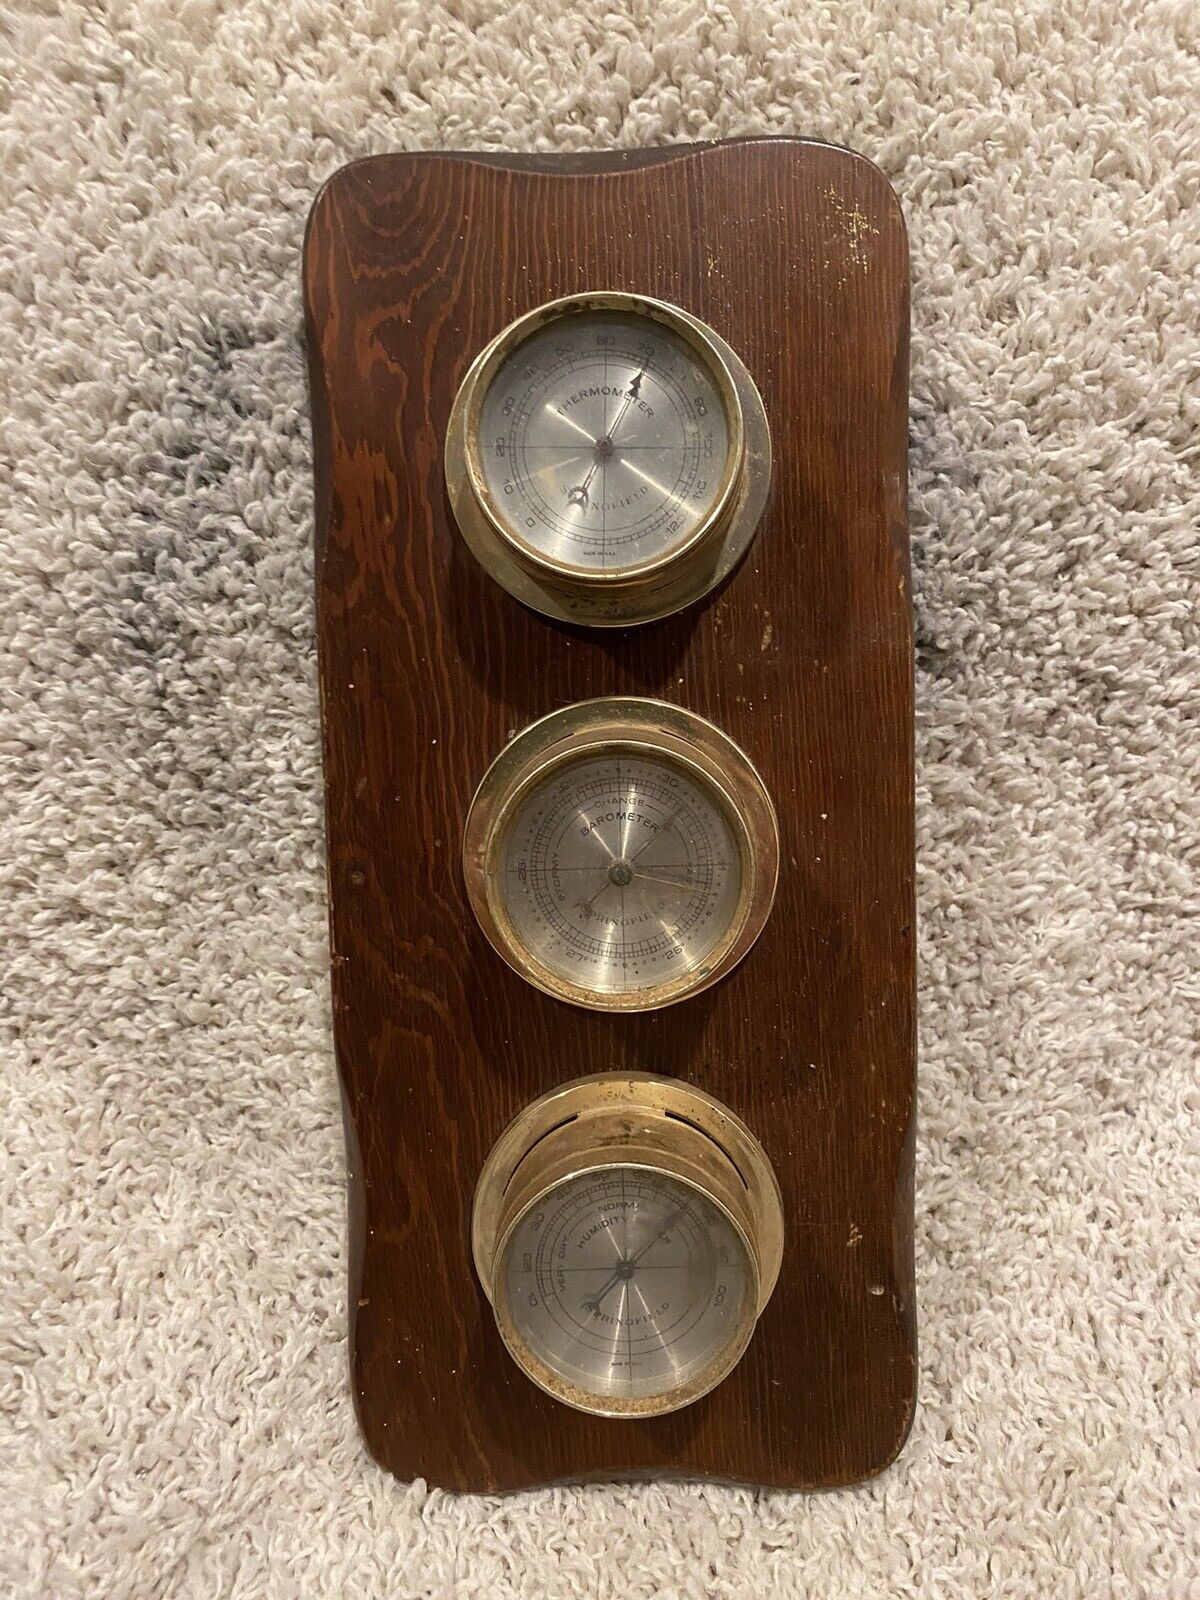 VTG Springfield Instrument Co. Thermometer Barometer and Humidity Meter Untested